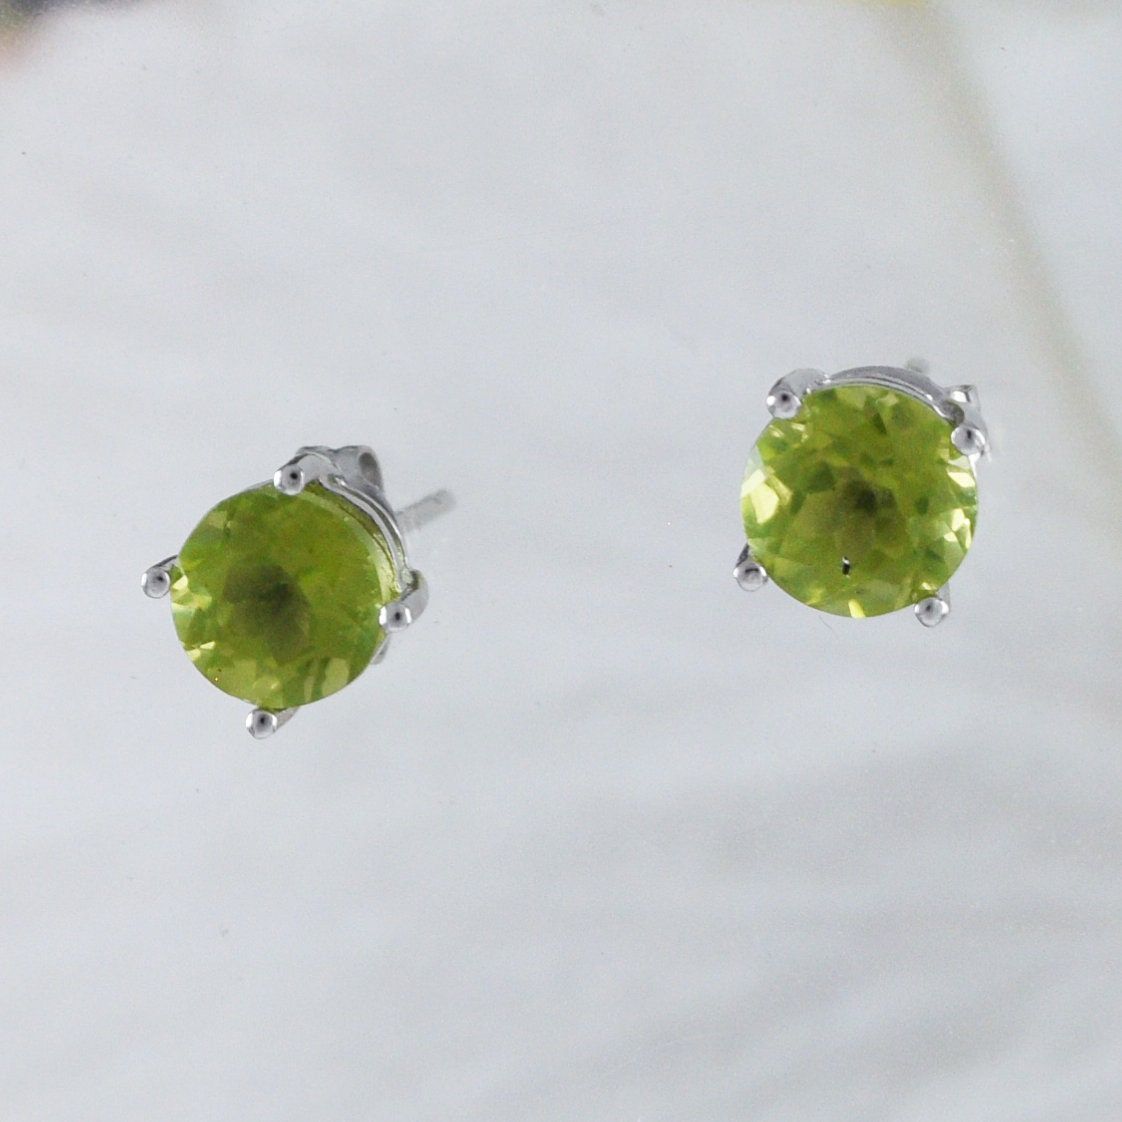 Birthday Gift Wedding Gift For Her Christmas Gift Natural Peridot Gemstone 925 Sterling Silver Handmade Floral Earring Anniversary Gift